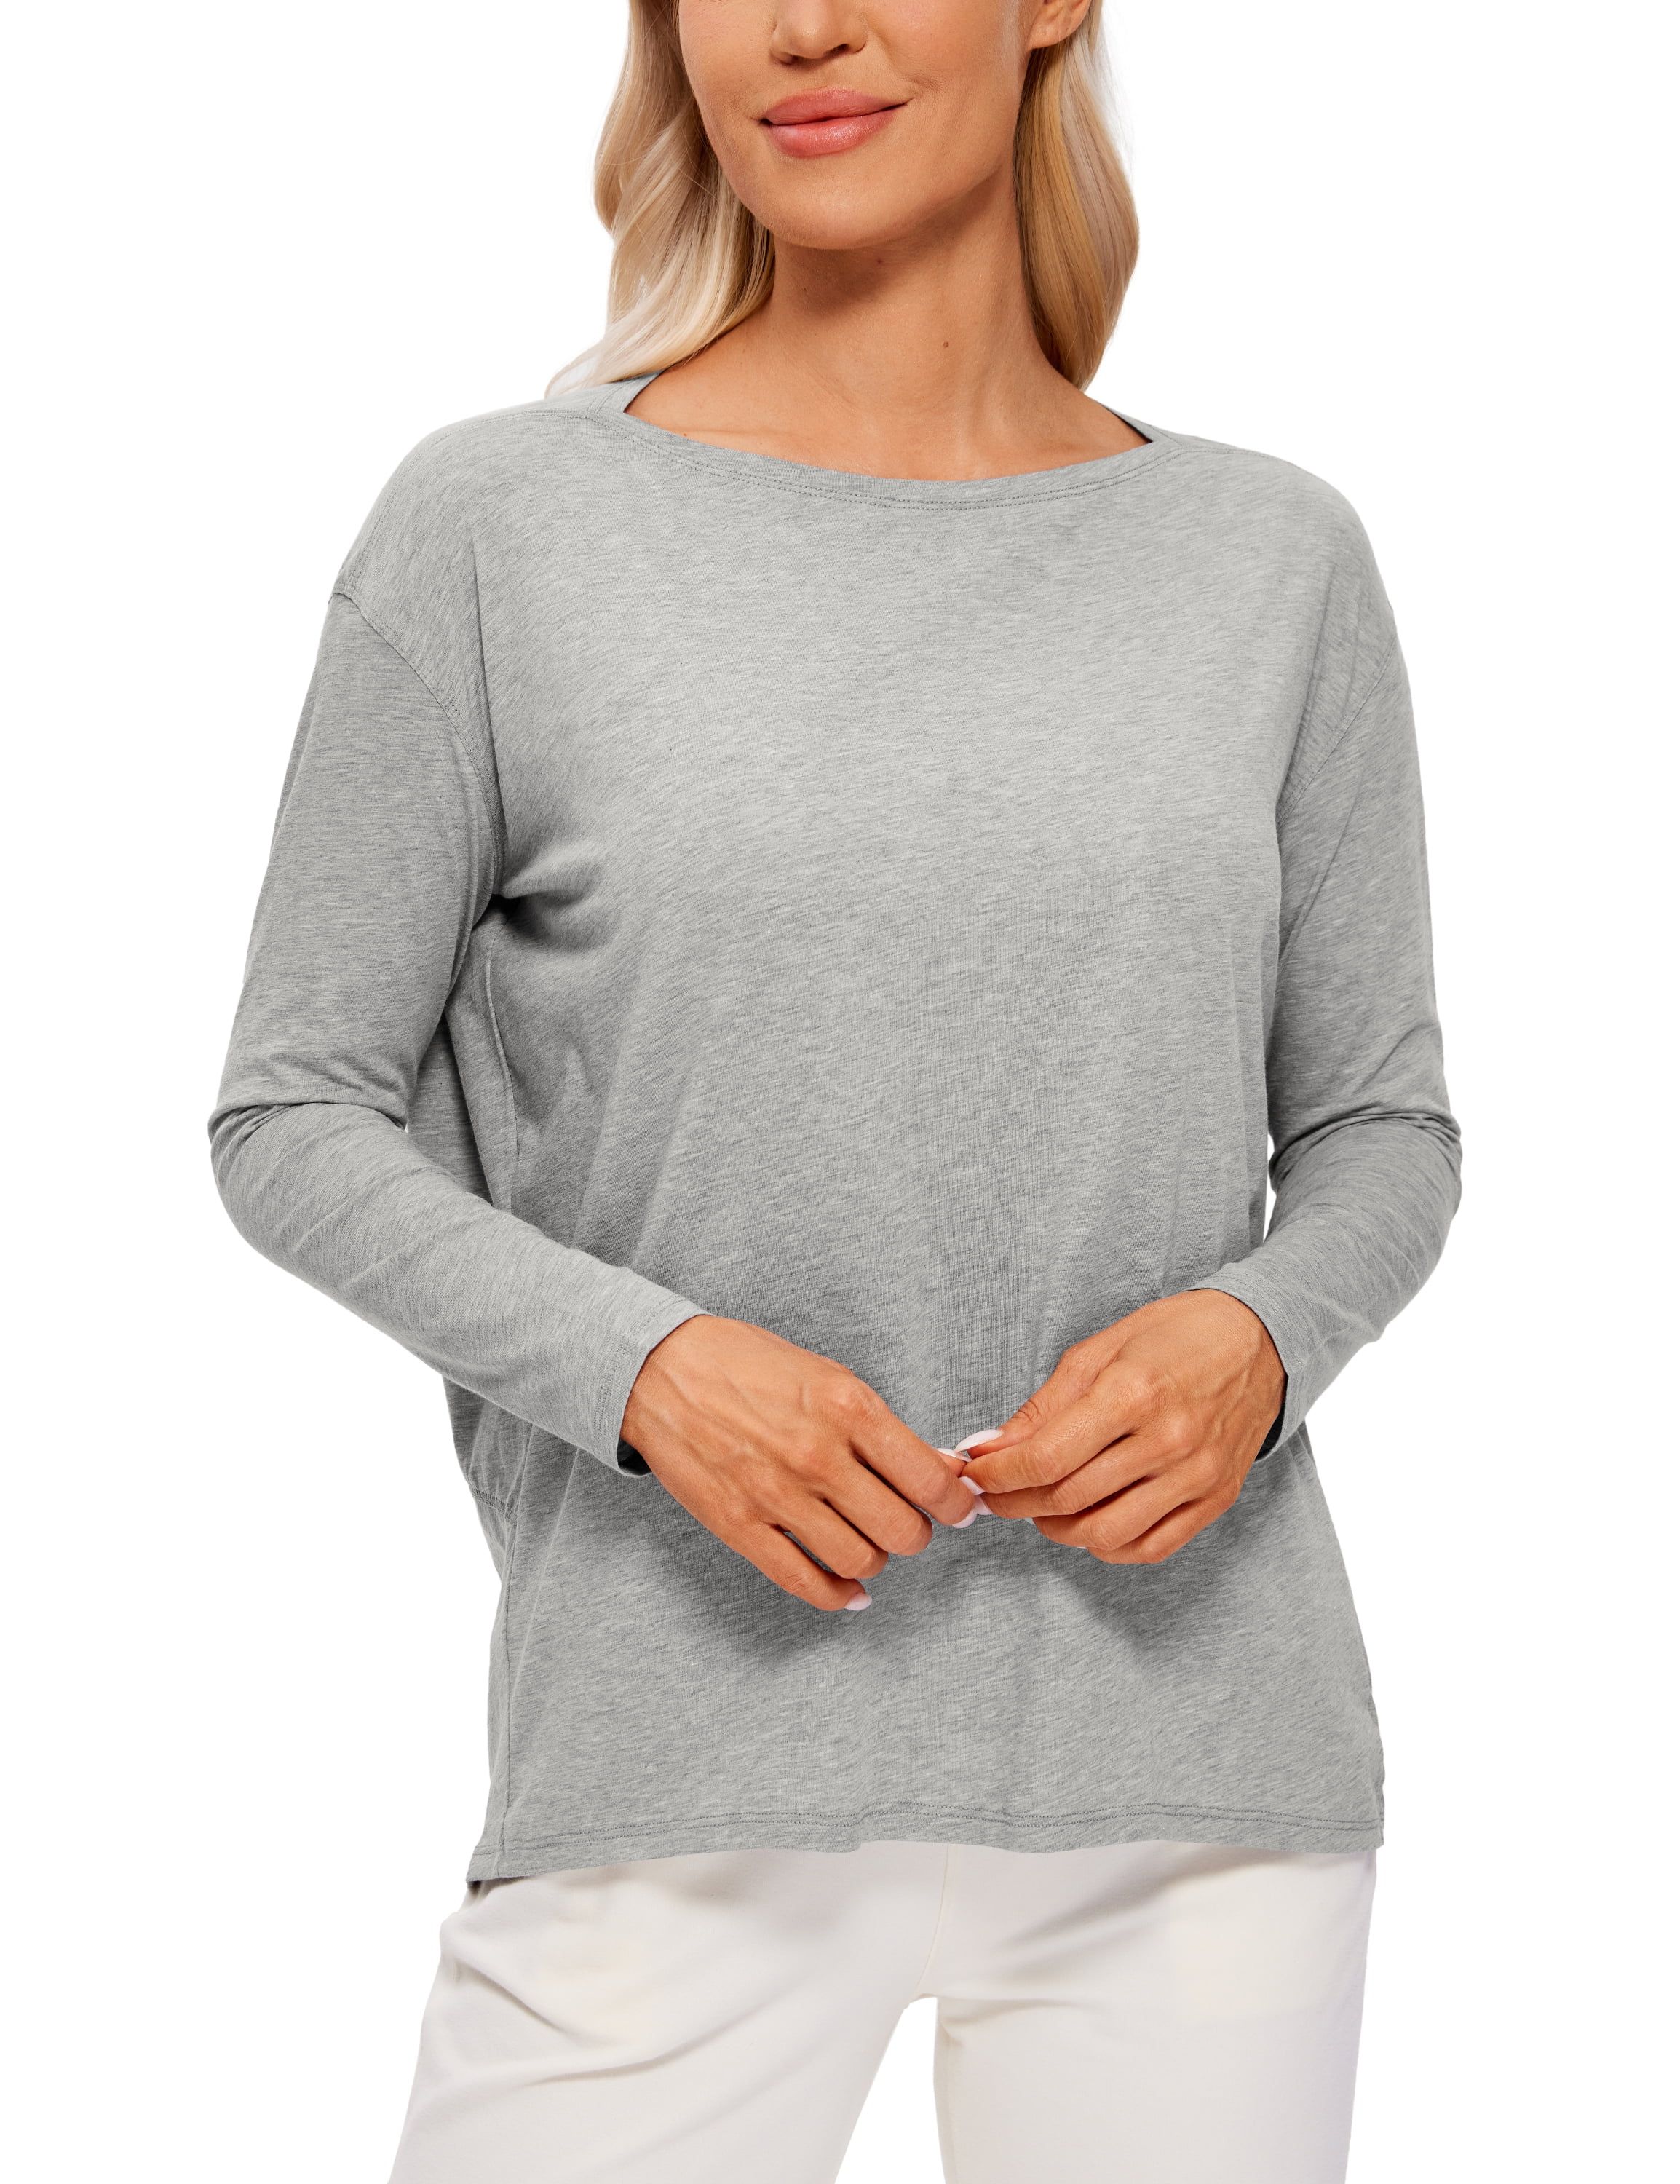 CRZ YOGA Long Sleeve Shirts for Women Loose Fit Pima Cotton Casual Tops | Walmart (US)